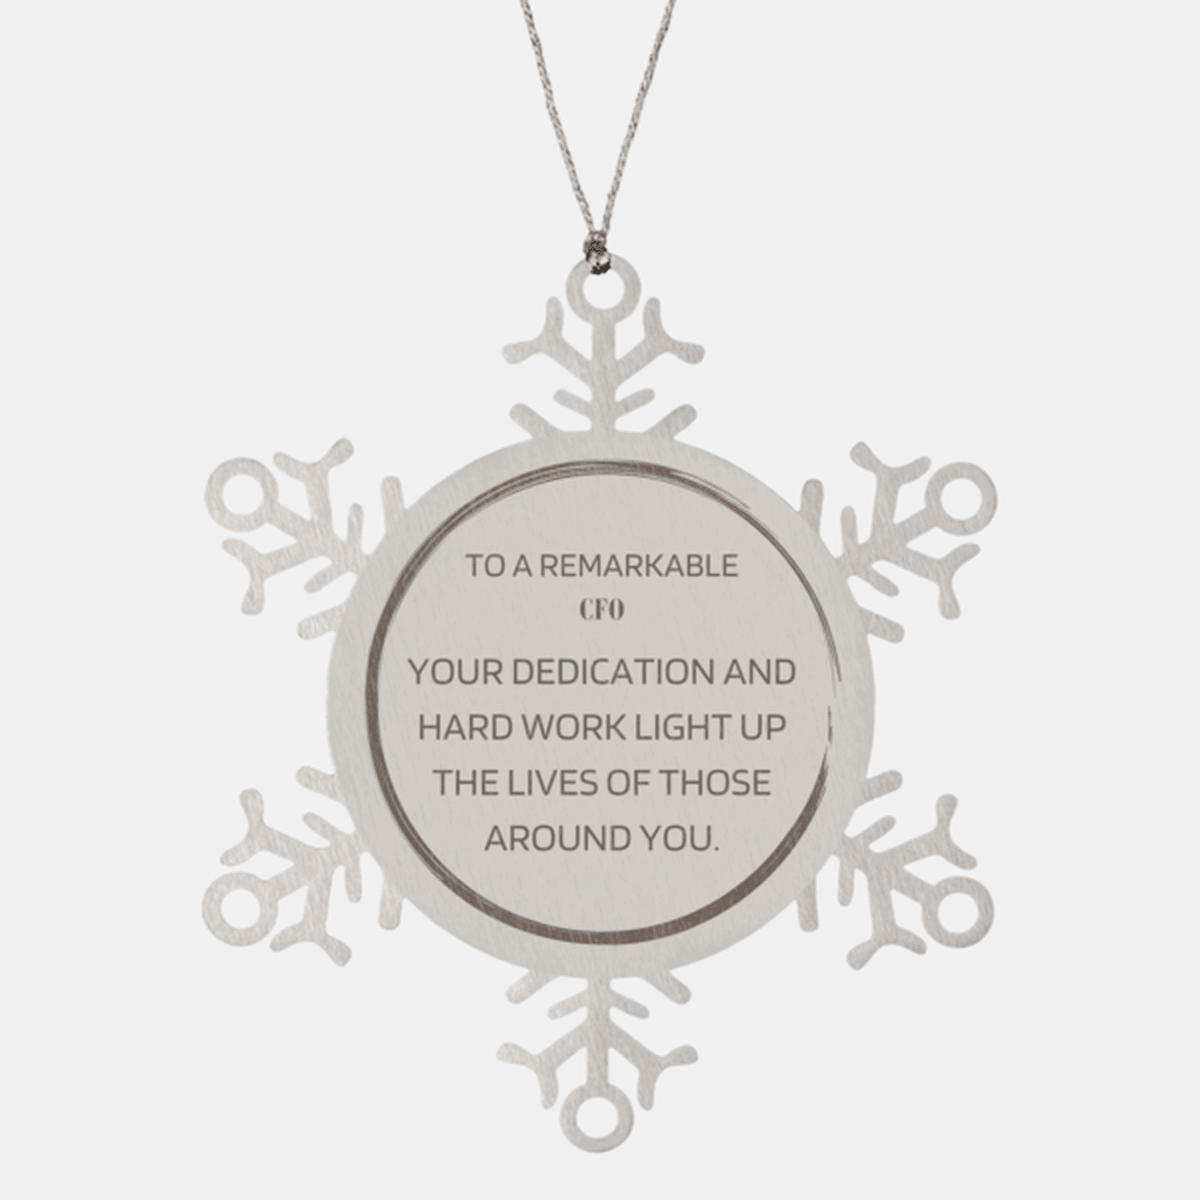 Remarkable CFO Gifts, Your dedication and hard work, Inspirational Birthday Christmas Unique Snowflake Ornament For CFO, Coworkers, Men, Women, Friends - Mallard Moon Gift Shop